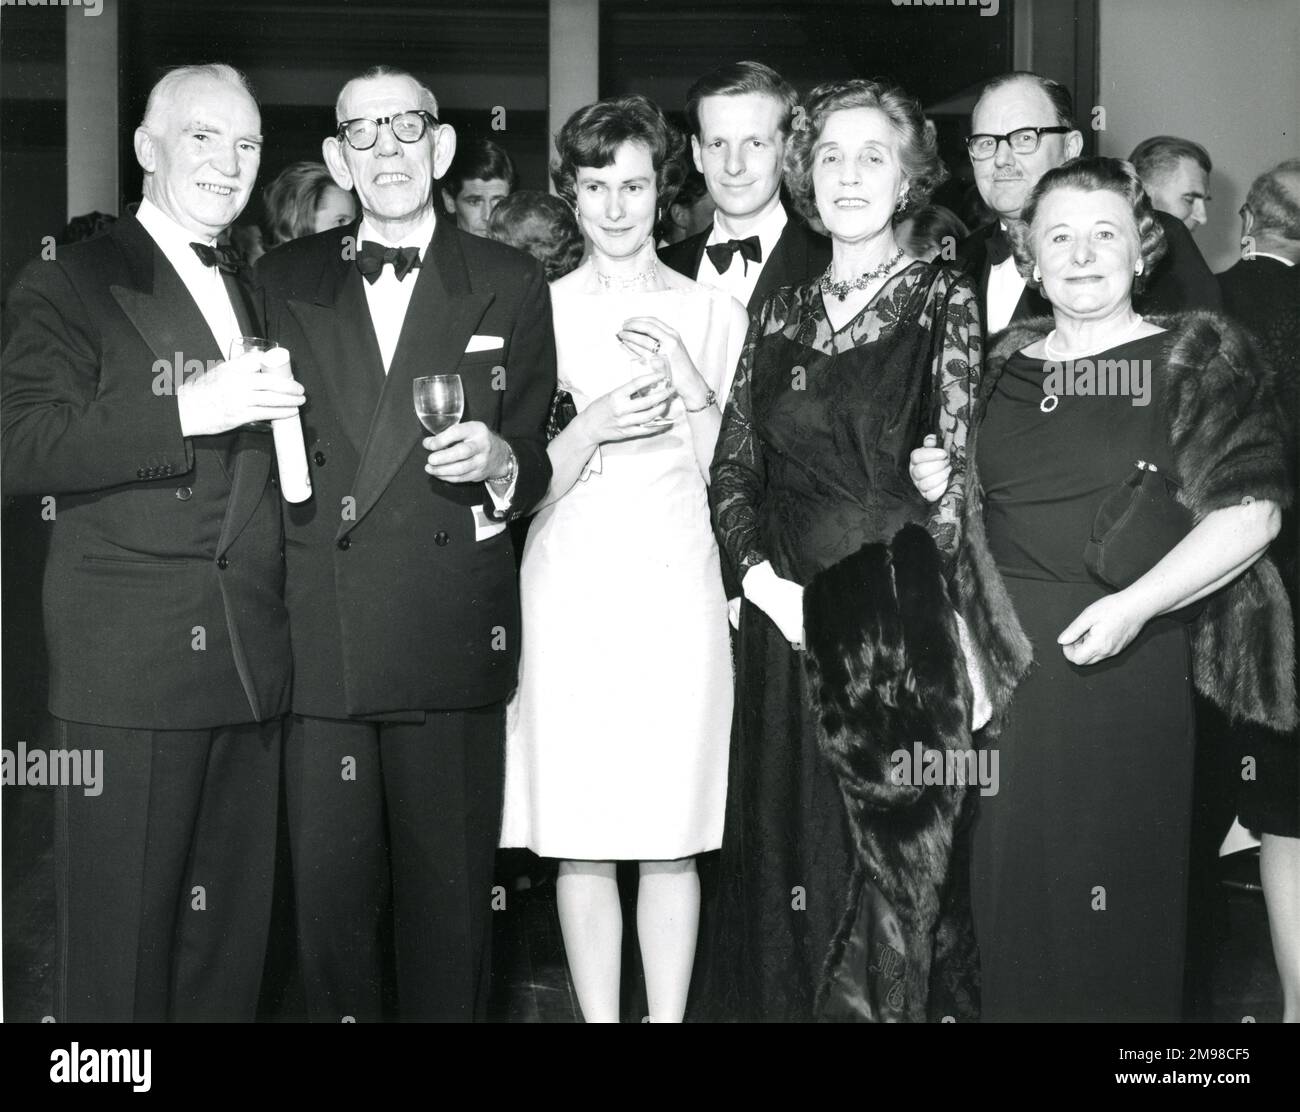 Among the guests at the Centenary Conversazione held at the Science Museum on 12 January 1966 were E.T. Jones, RAeS President 1956-1957; R. Graham, ??, ??, Mrs Graham, Dr Frank Follet, Director of the Science Museum, and Mrs Follet. Stock Photo